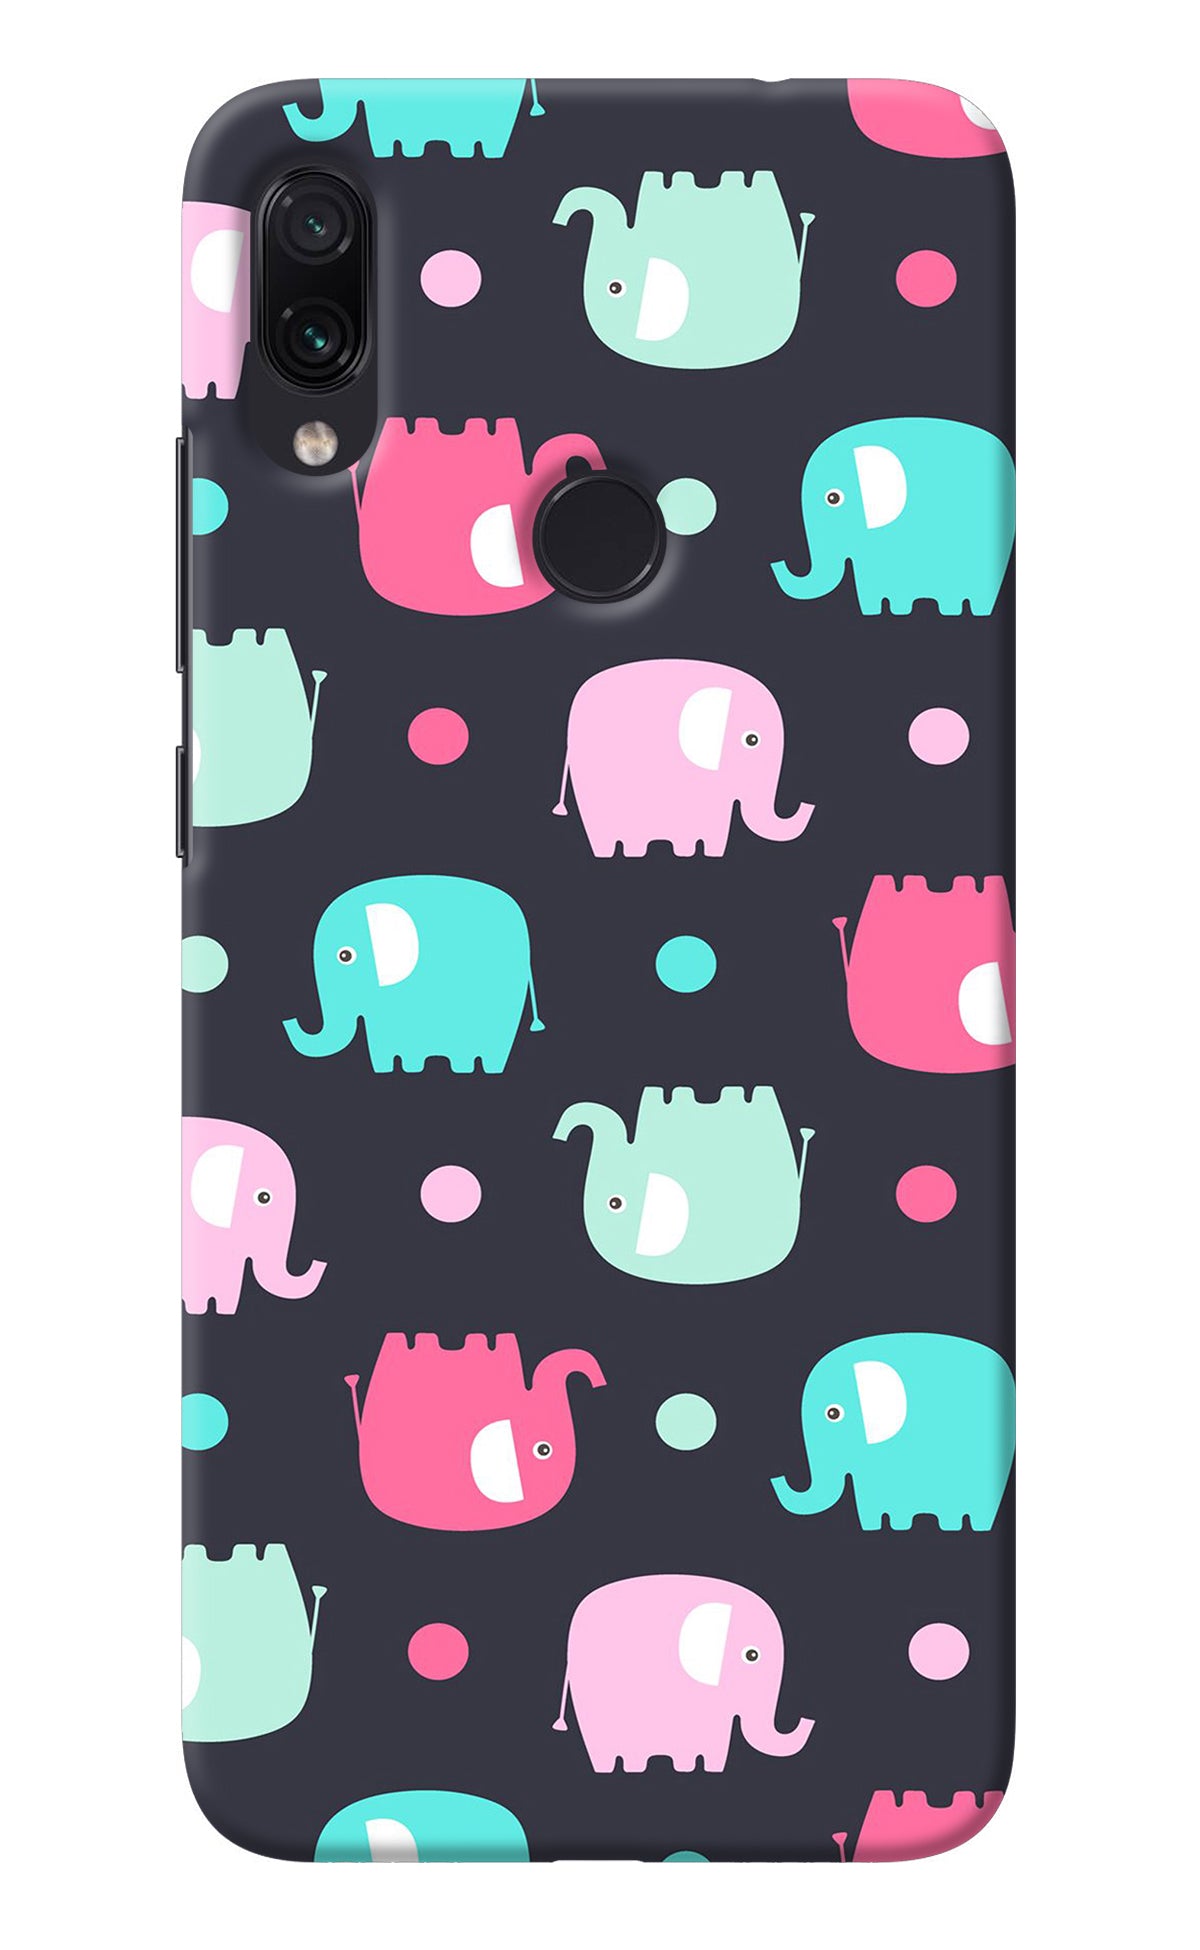 Elephants Redmi Note 7/7S/7 Pro Back Cover